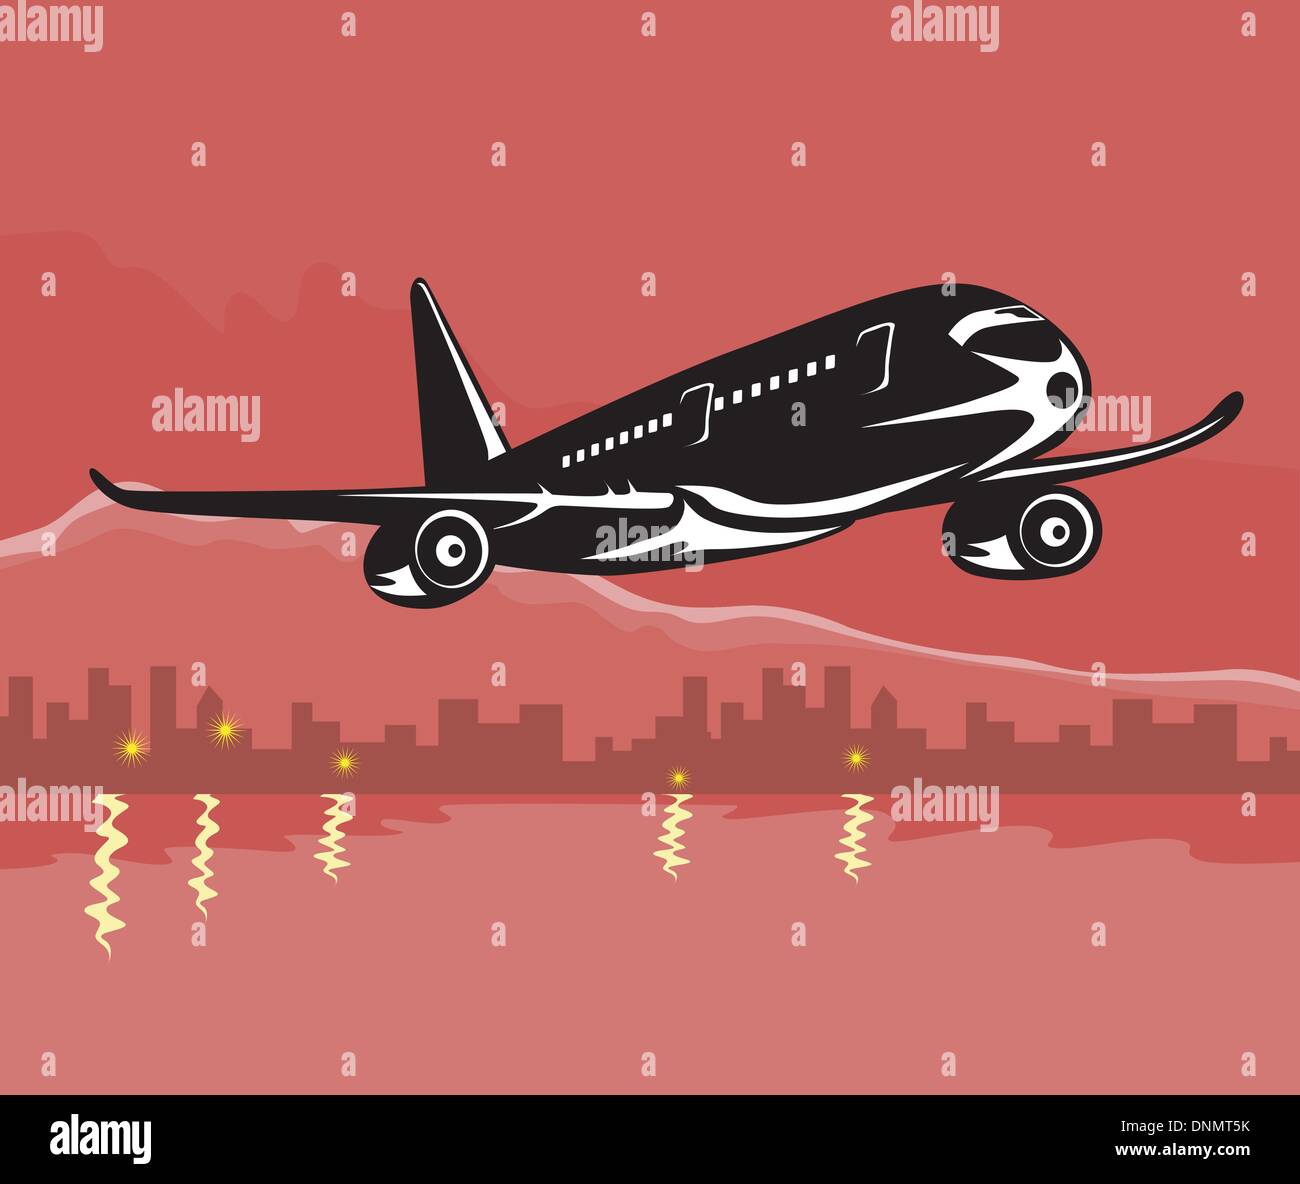 Illustration of a commercial jet plane airliner with city and mountains in background. Stock Vector